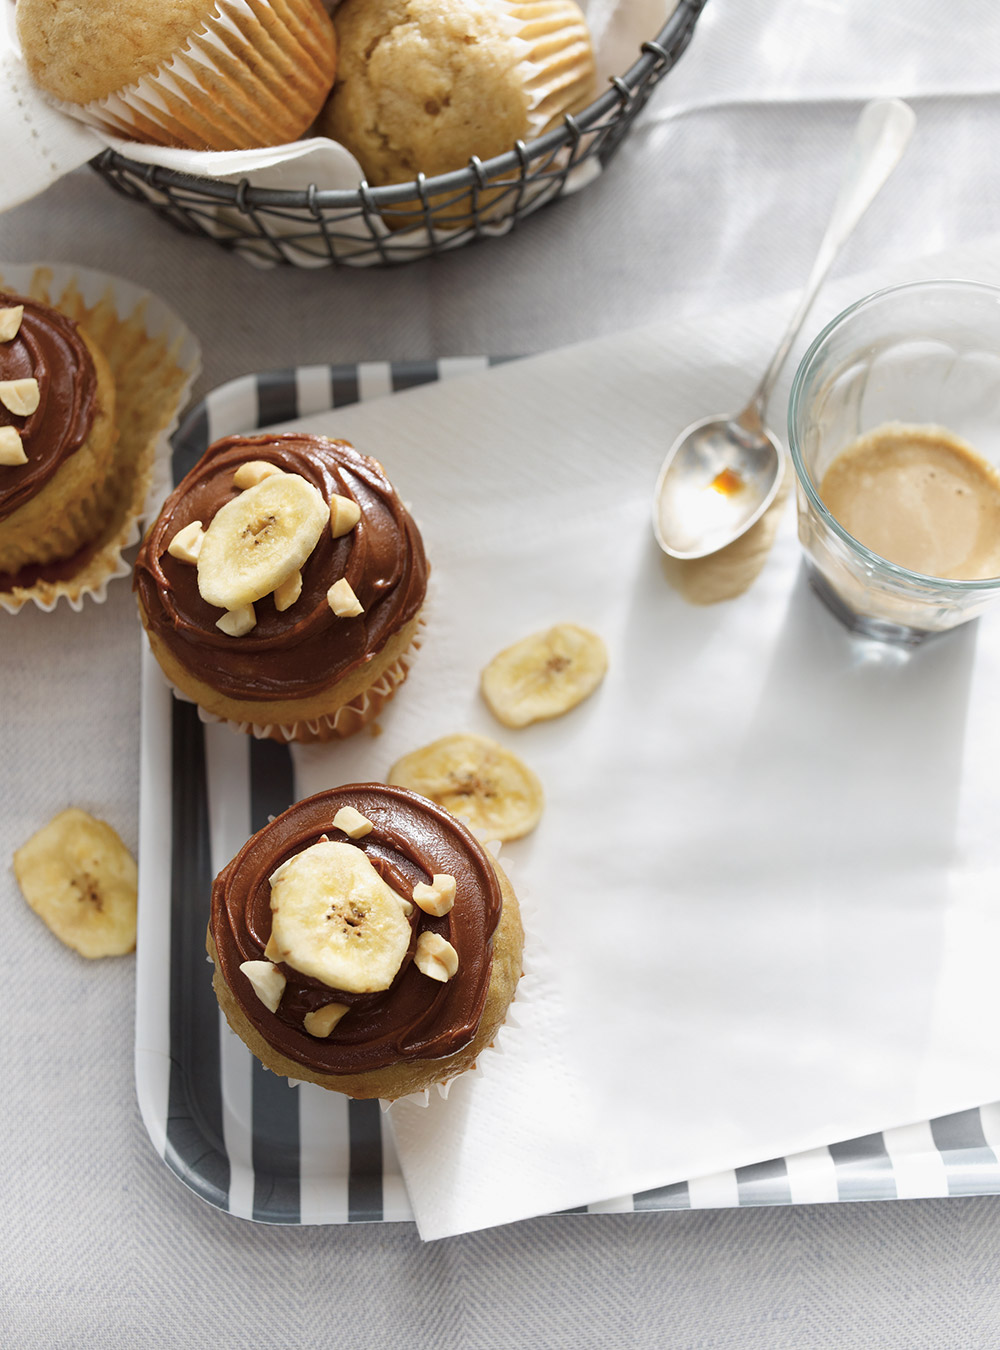 Banana Muffins with Chocolate-Peanut Frosting